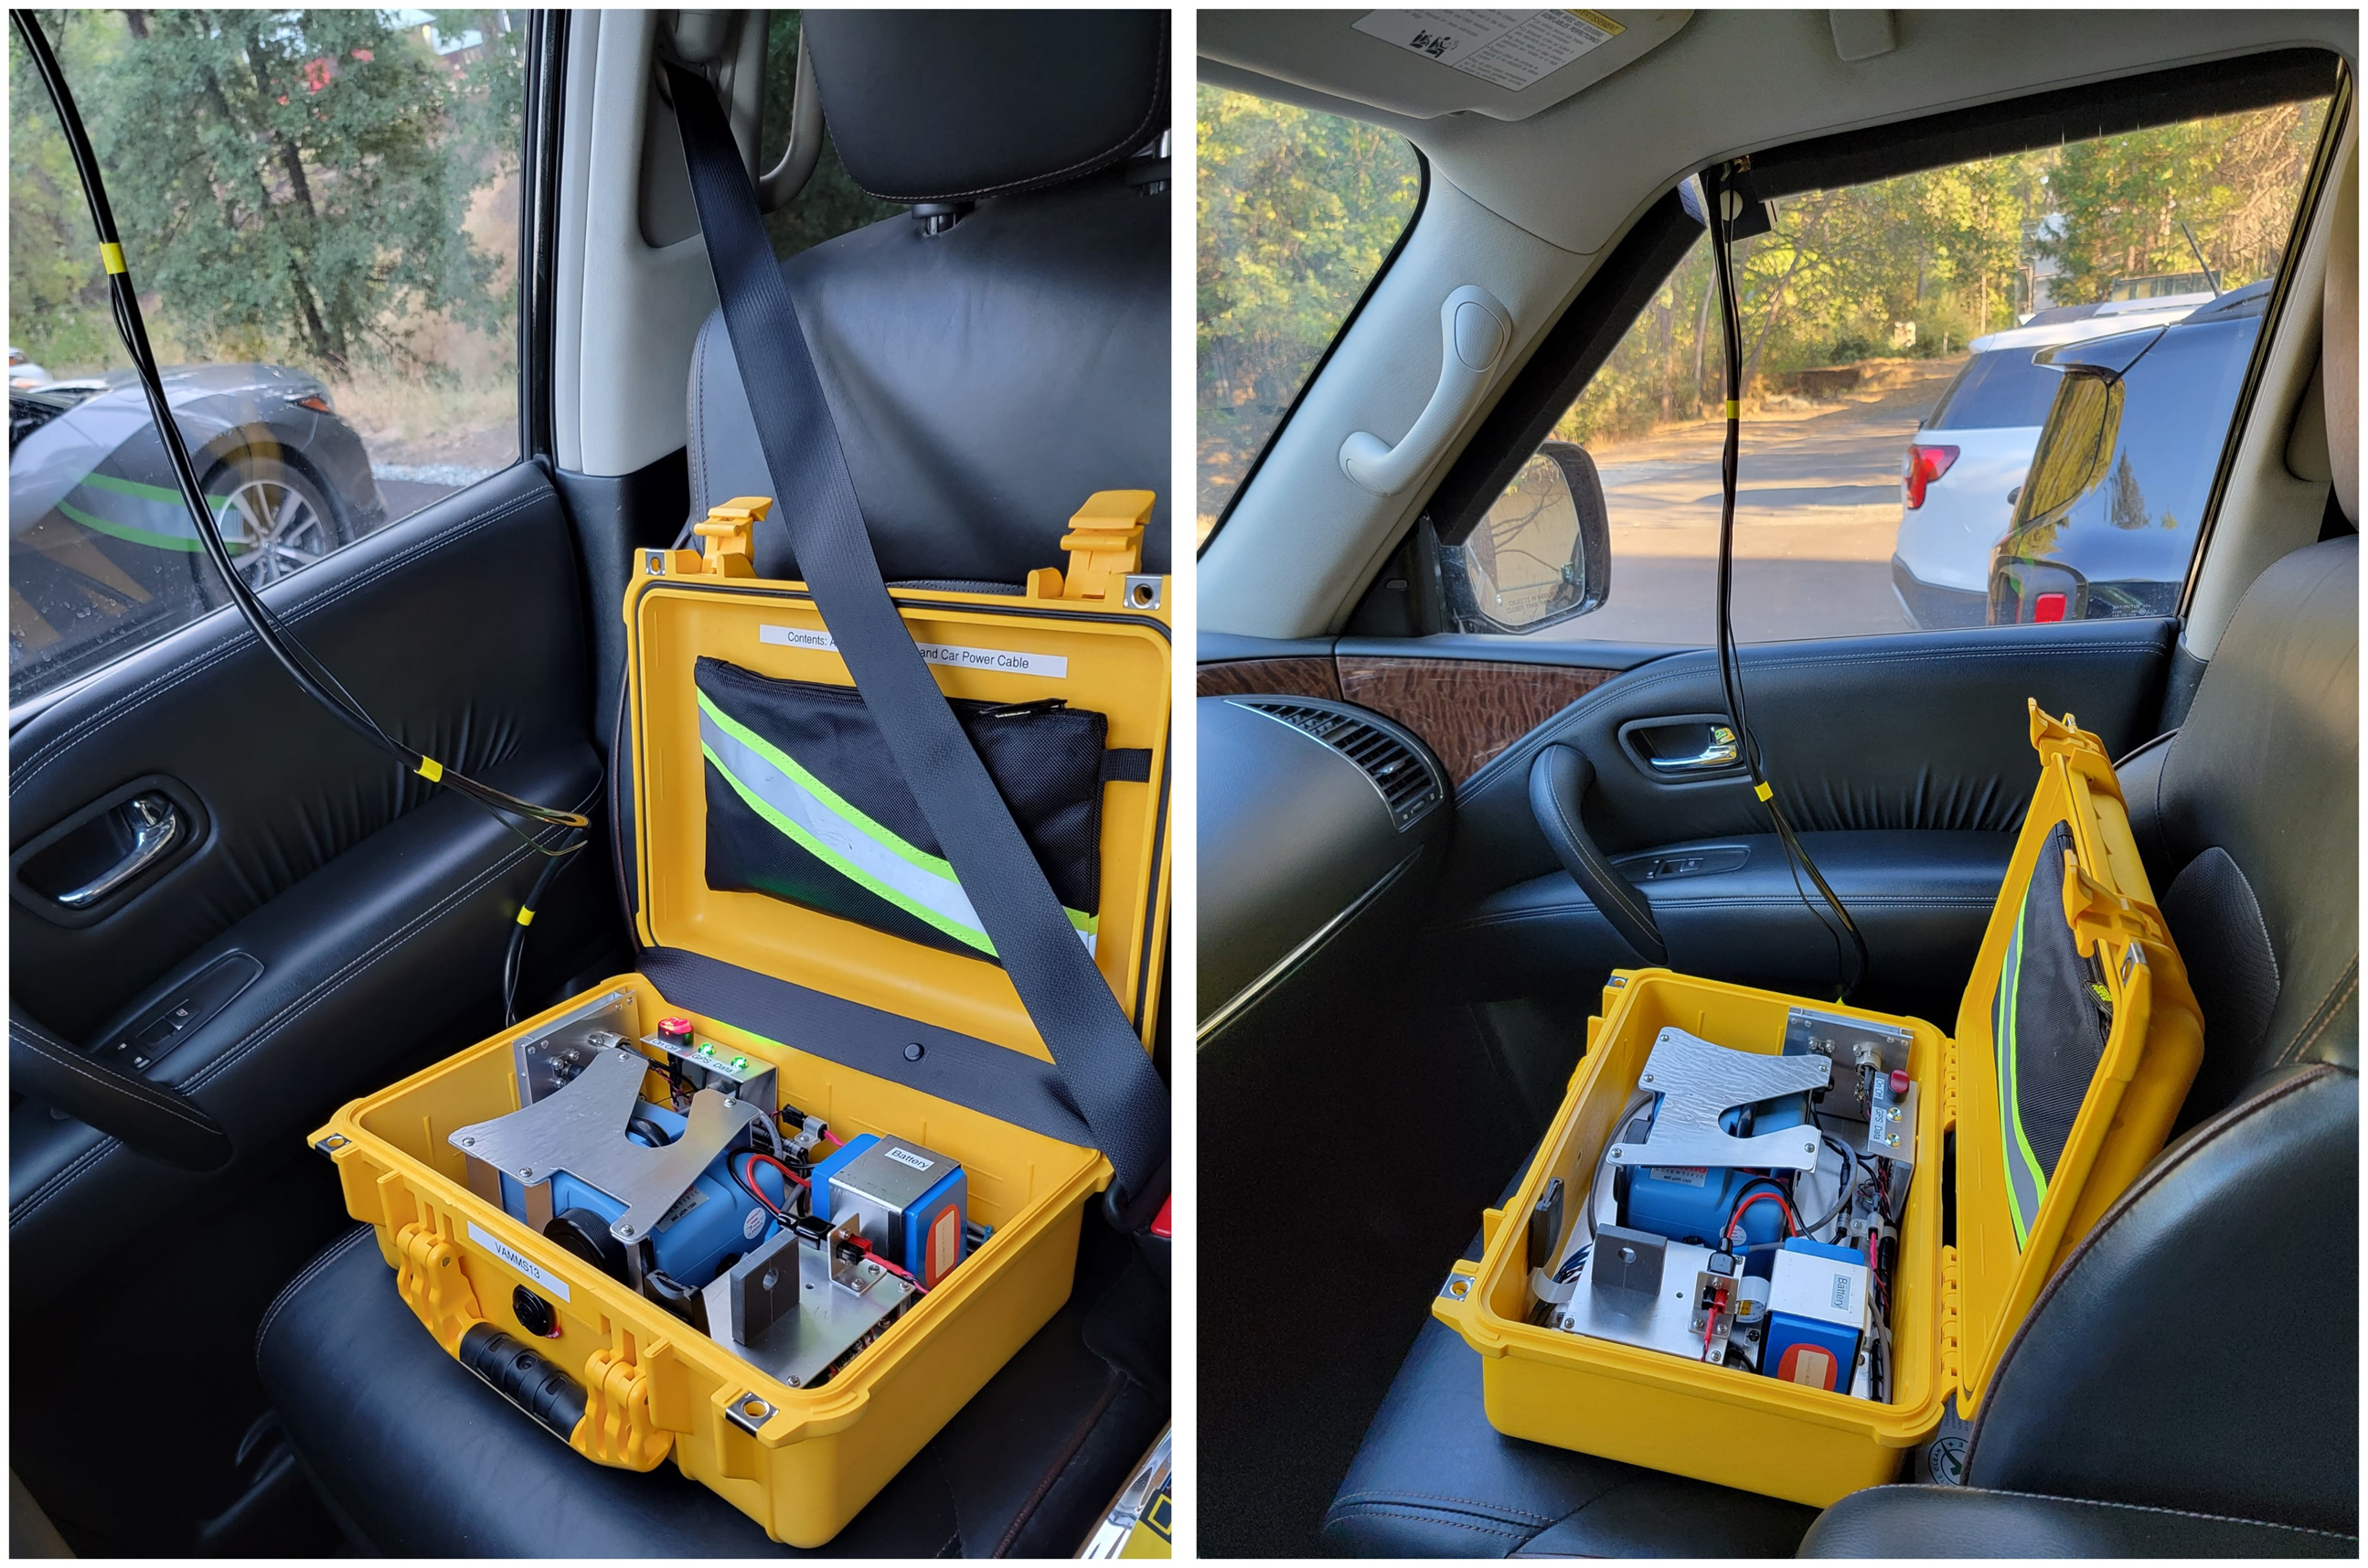 Two photos of the VAMMS mobile air sensor, in the passenger seat of a car. The lid of the VAMMS is open and it's ready to take measurements.